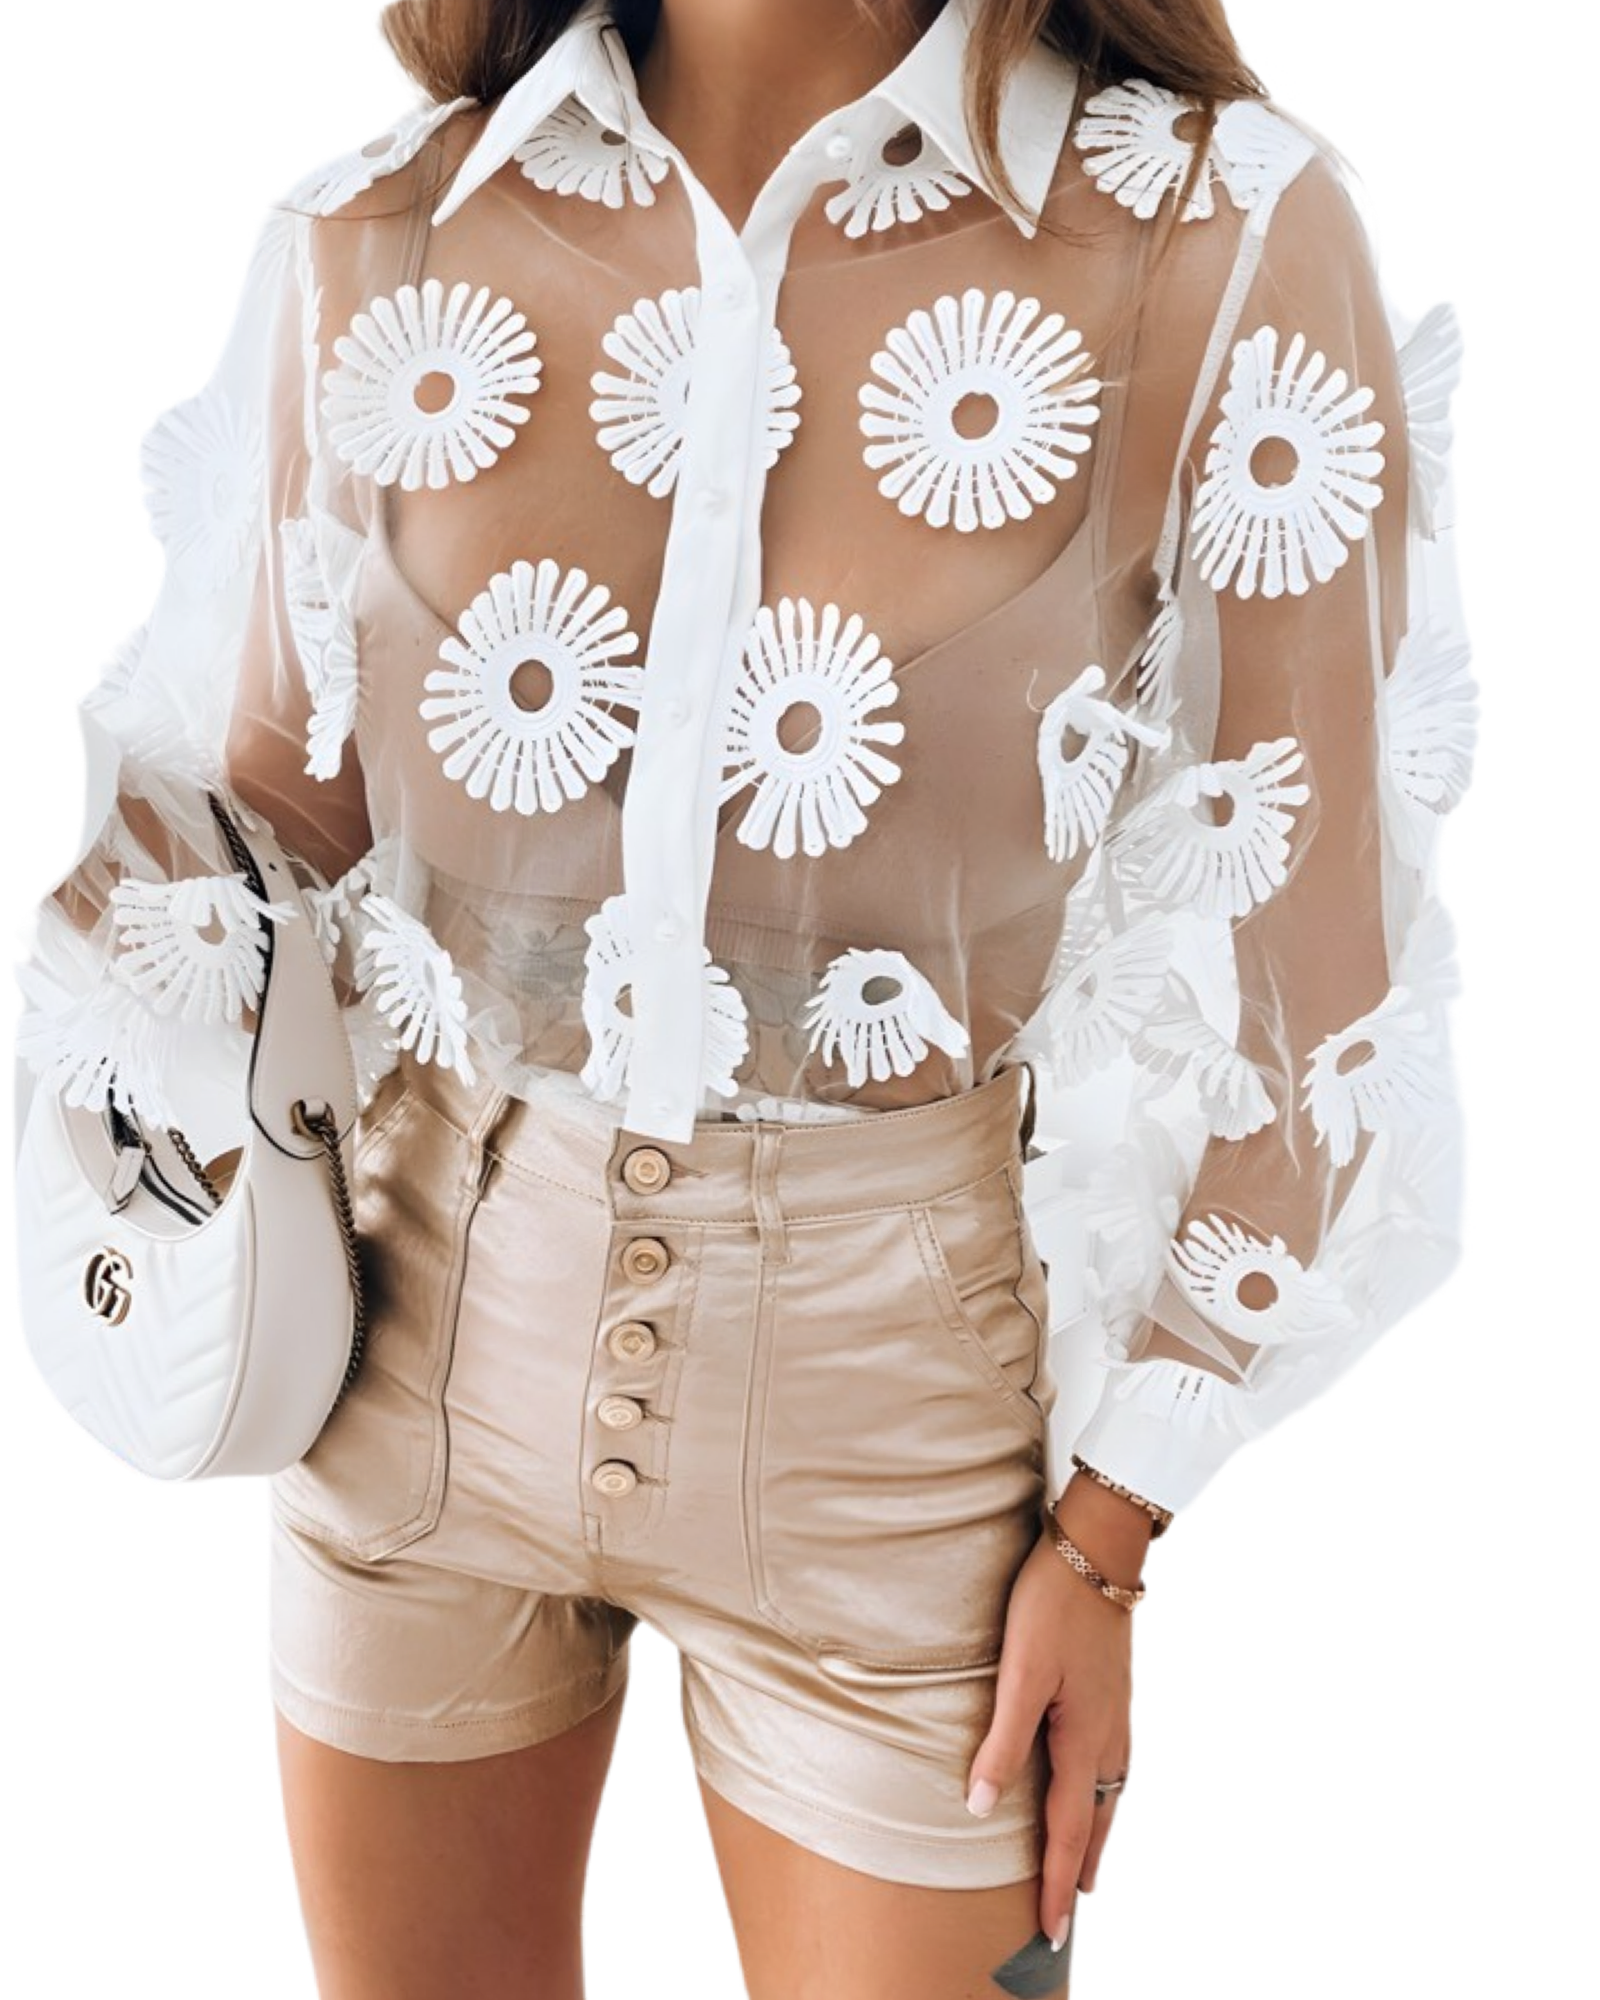 New spring summer collection shirt Top